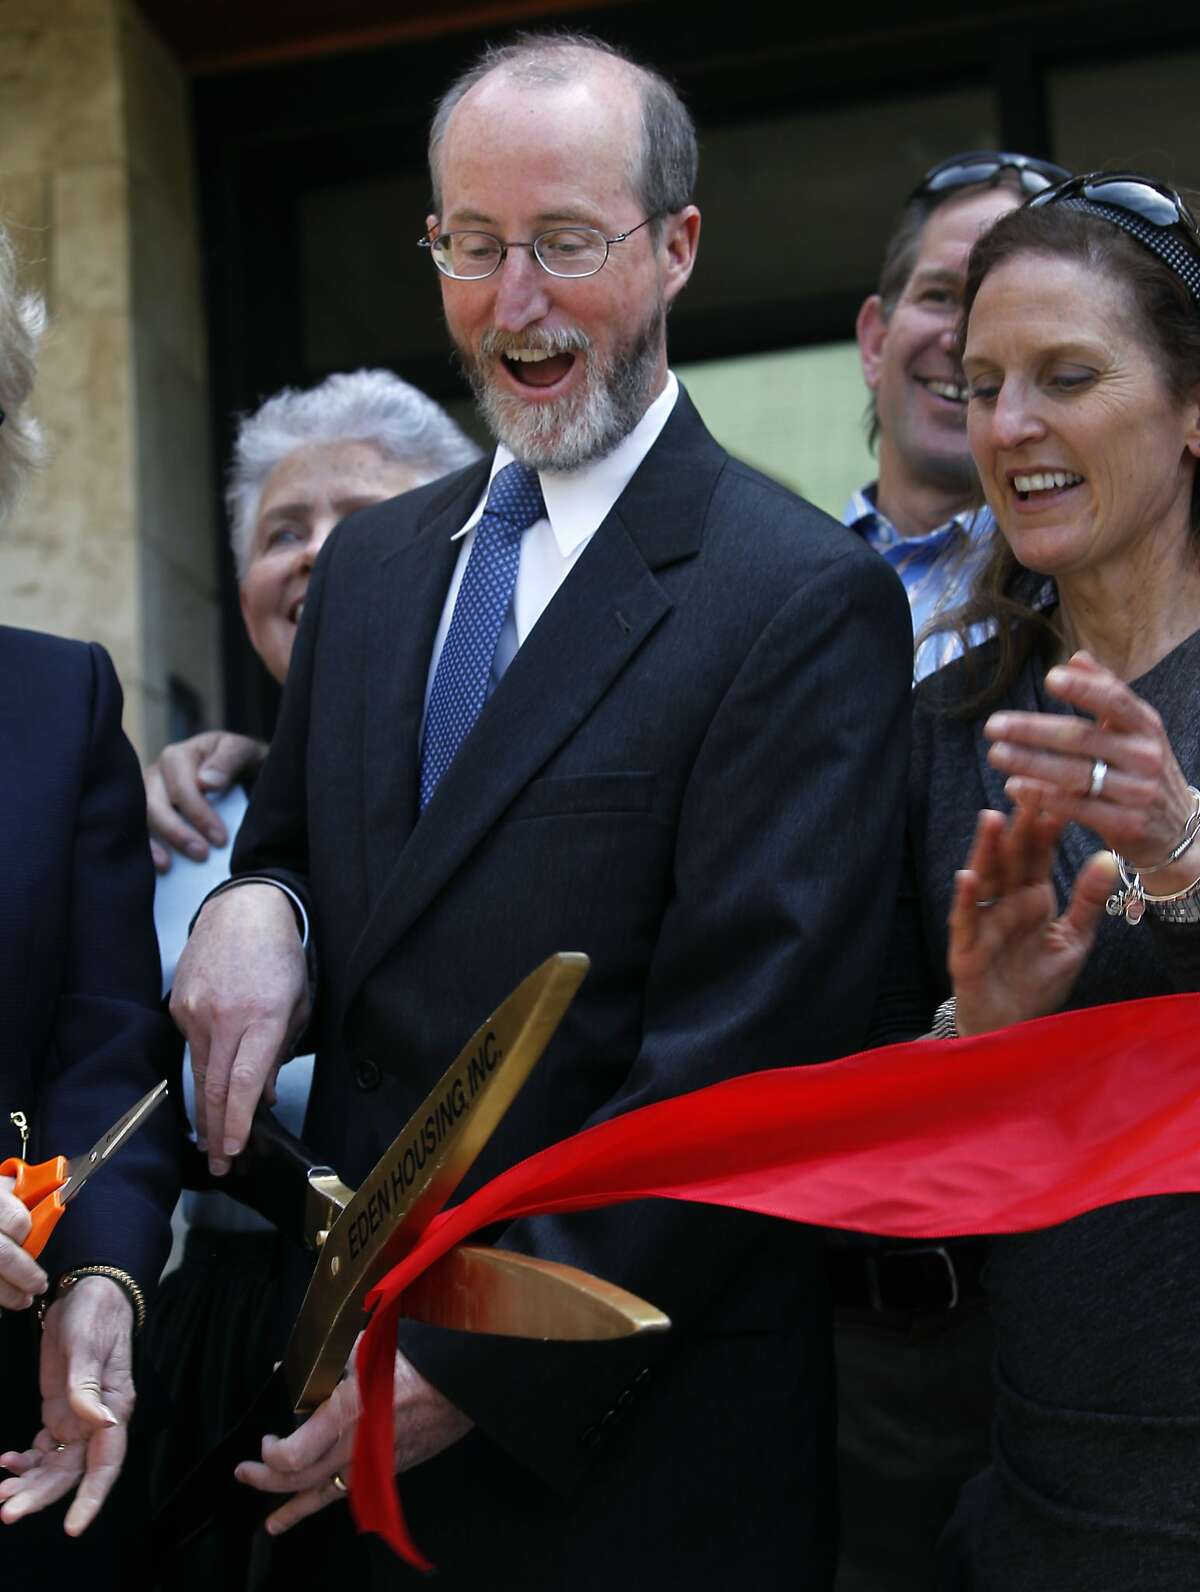 Orinda mayor Steve Glazer has the honor of wielding the big scissors at a ribbon cutting ceremony for an affordable housing complex for seniors in Orinda, Calif. on Thursday, April 9, 2015. Glazer is facing a runoff election in May against Assemblywoman Susan Bonilla for the 7th District Senate seat which opened up when Mark DeSaulnier was elected to the U.S. Congress.